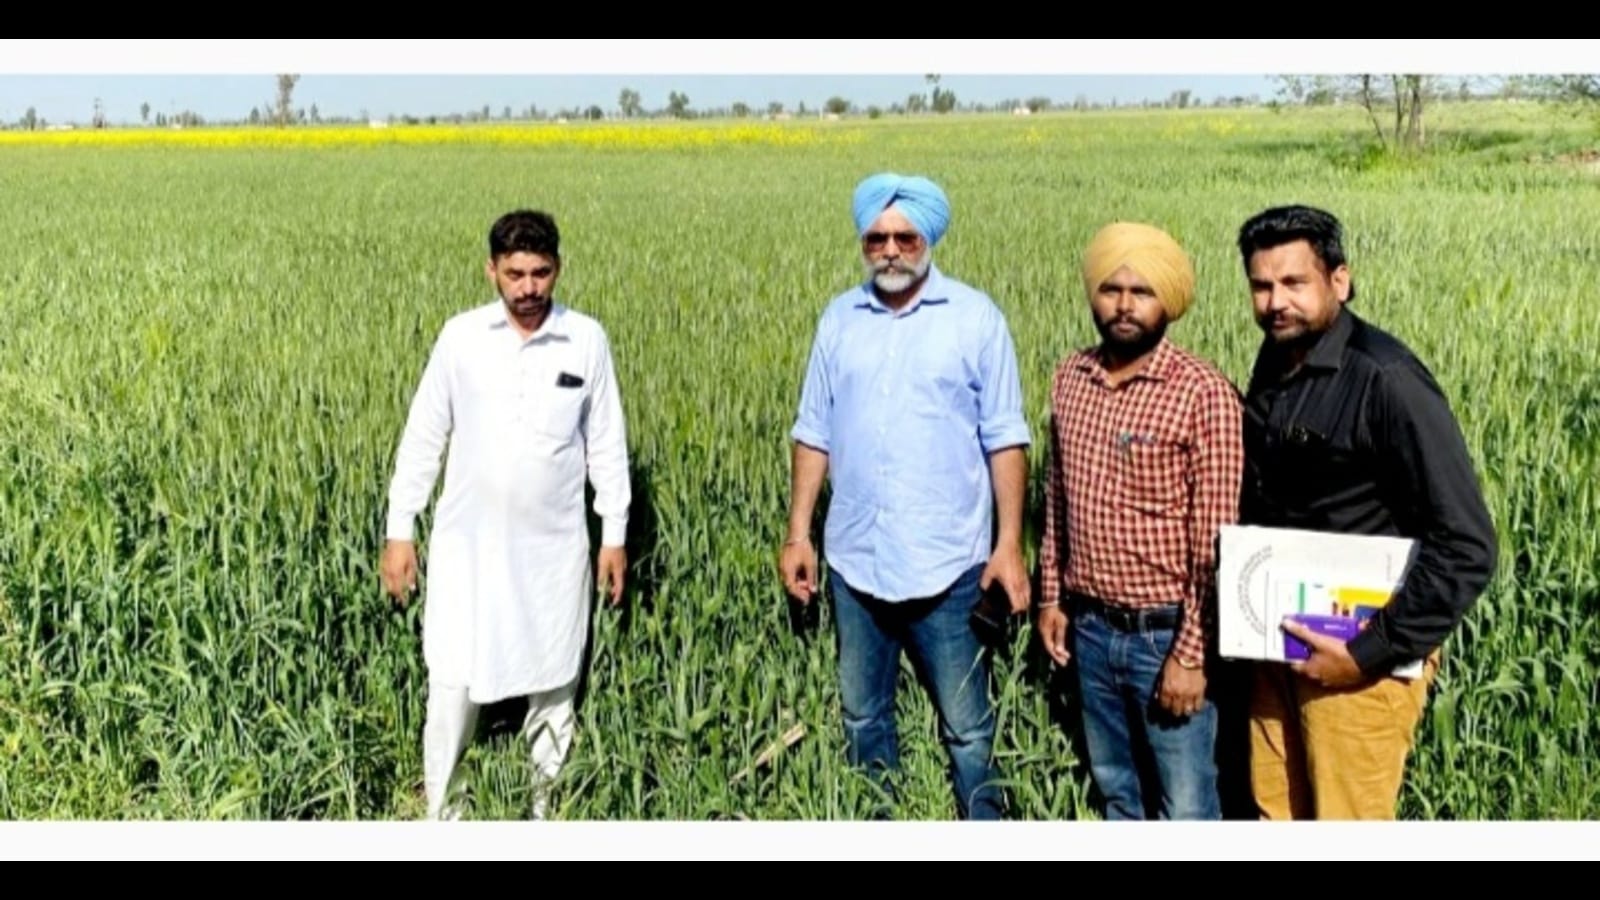 Rise in temperature: Farmers must go for light irrigation, caution experts